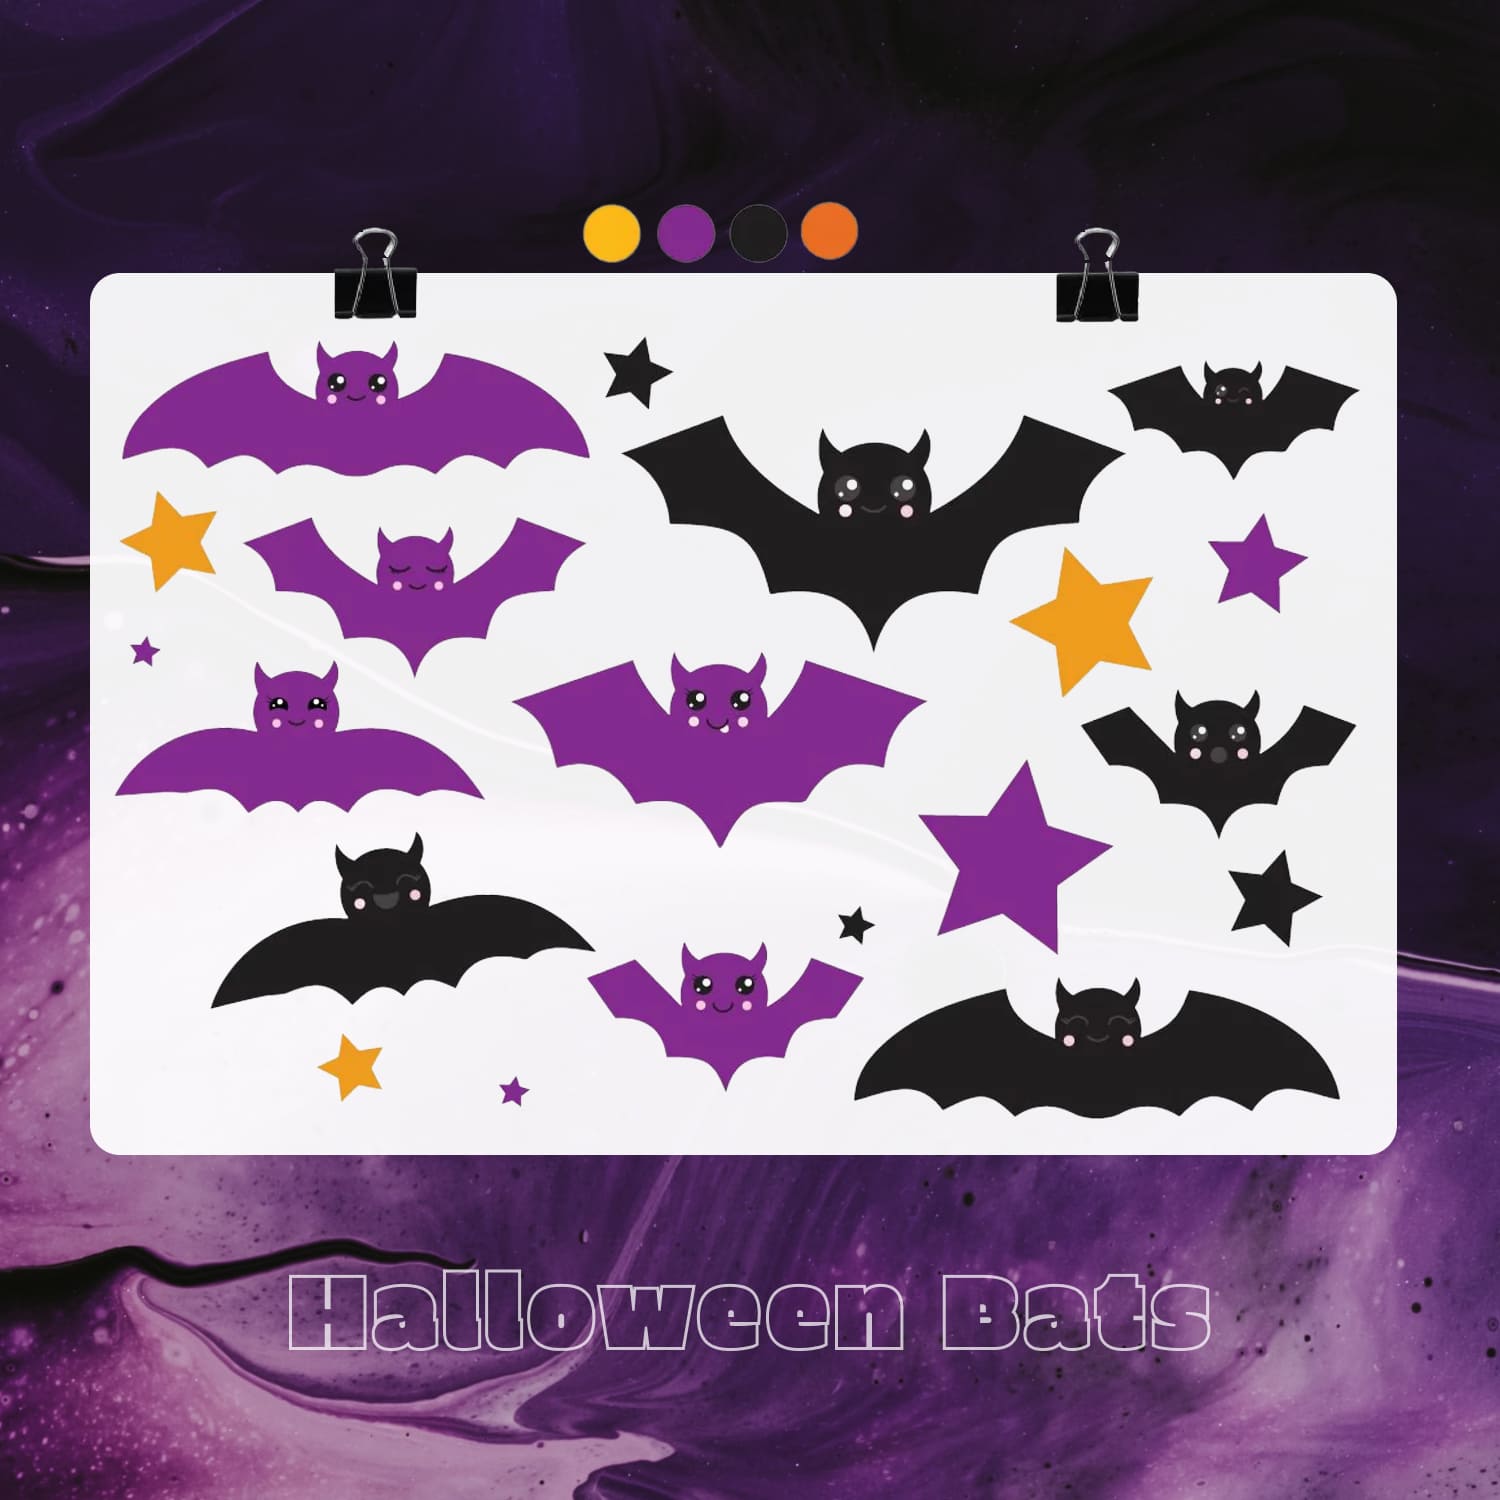 Halloween Bats Graphics and Illustrations cover image.